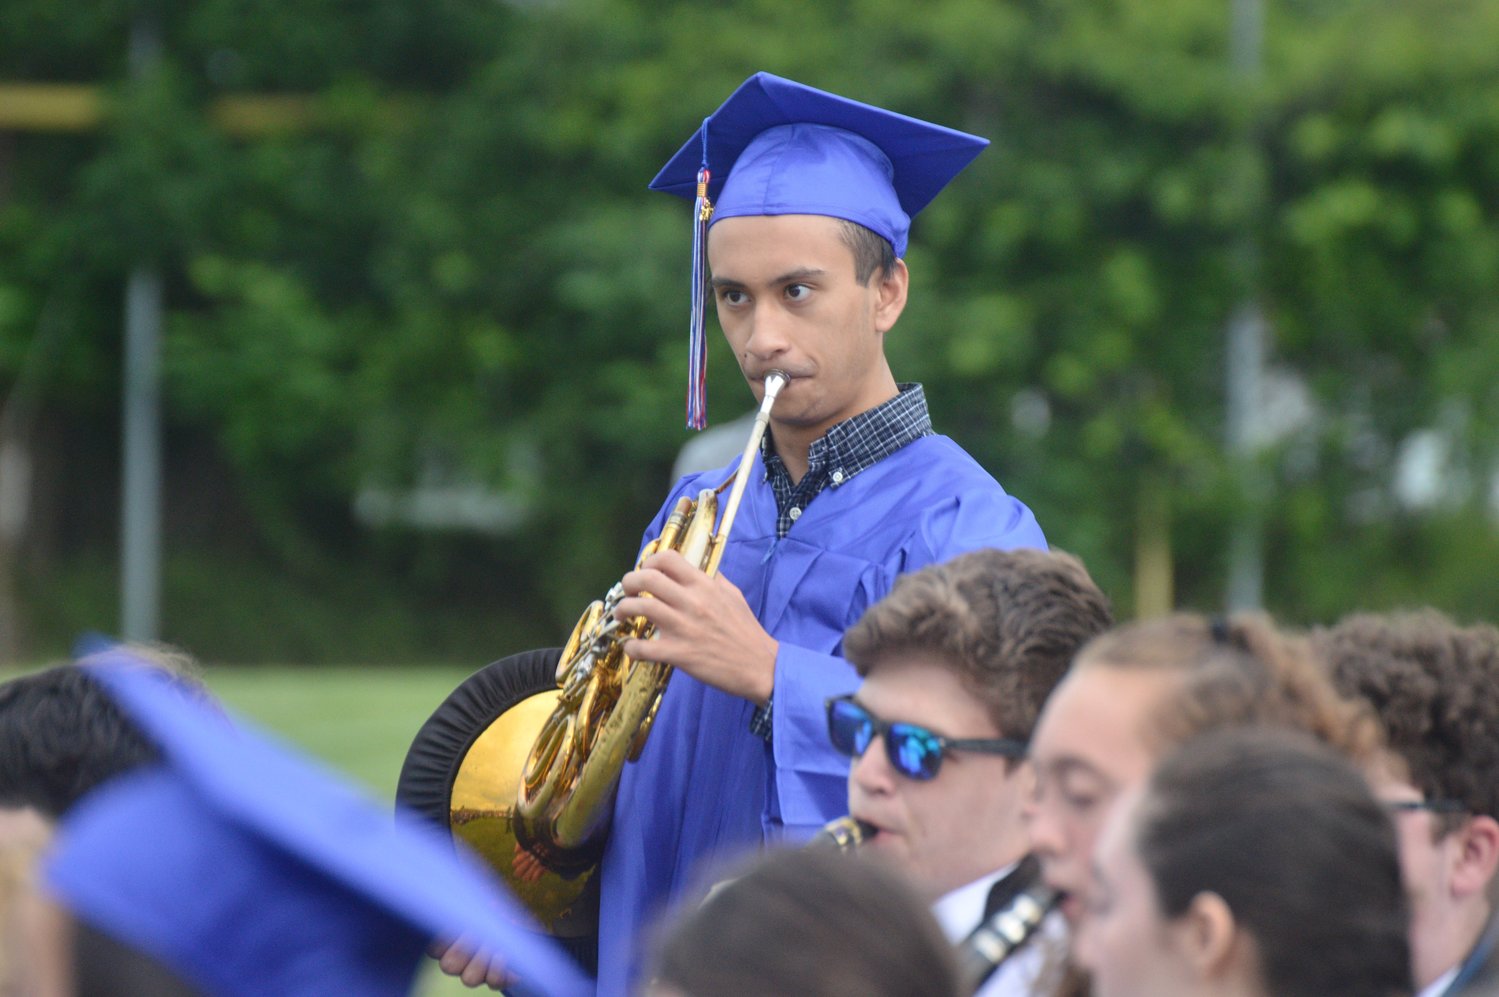 French horn player Tito Villacorta performs one final song with the Portsmouth High School band before receiving his diploma.